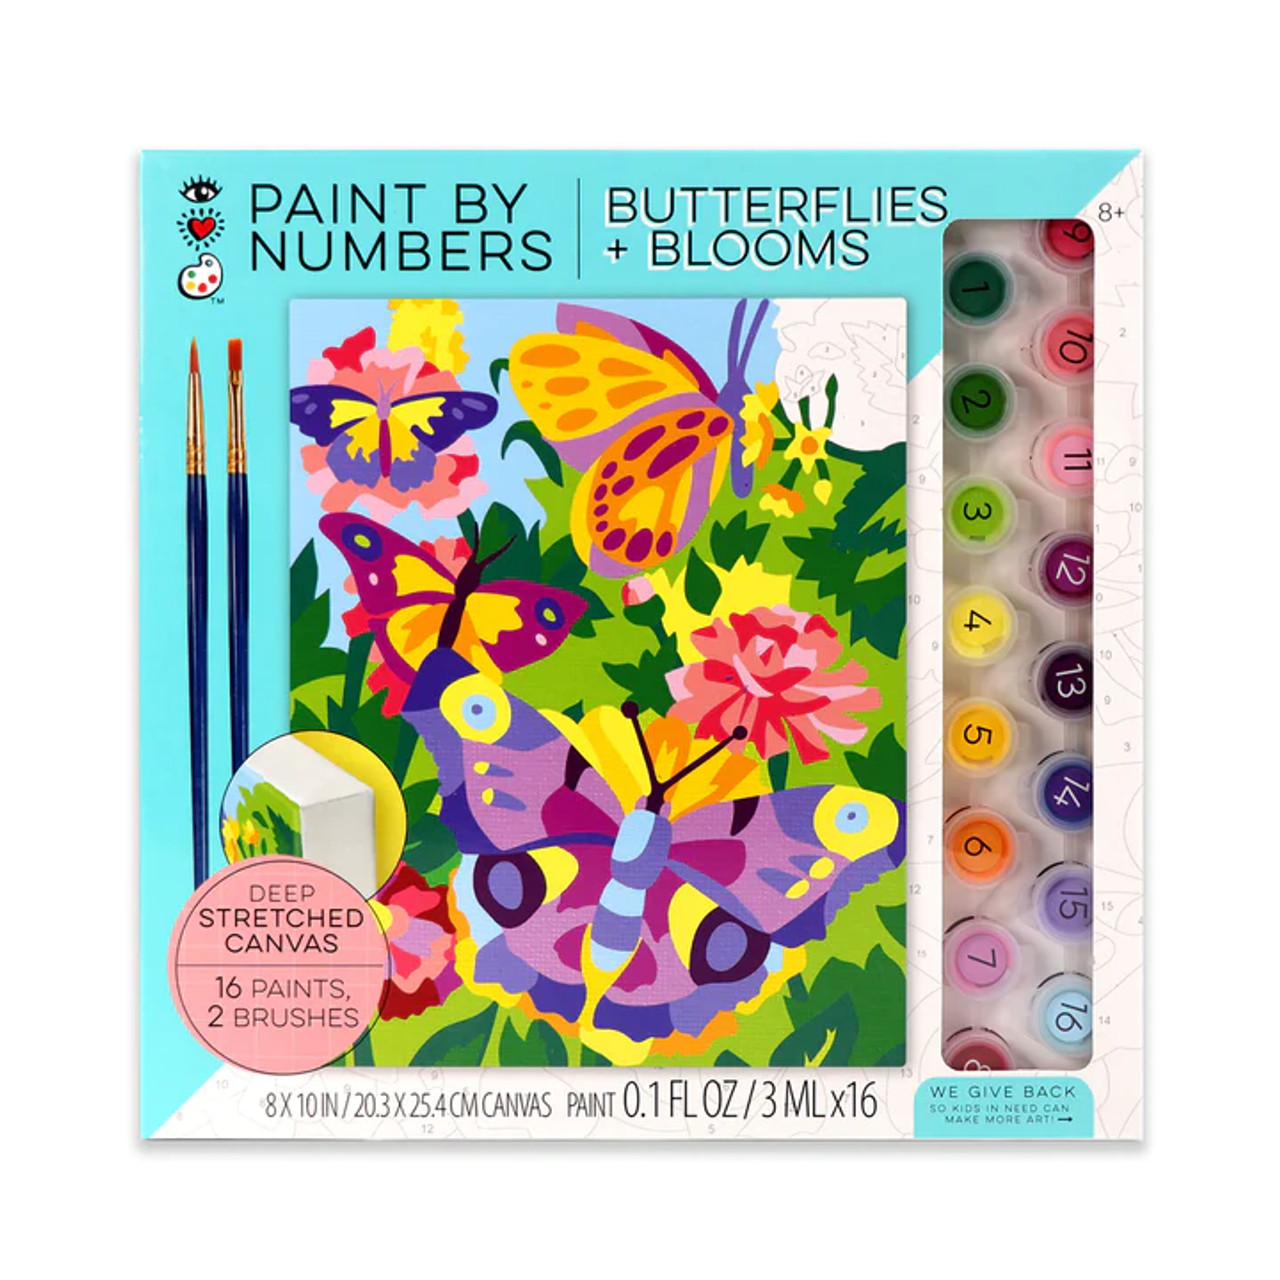 Butterflies and Blooms Paint by Number